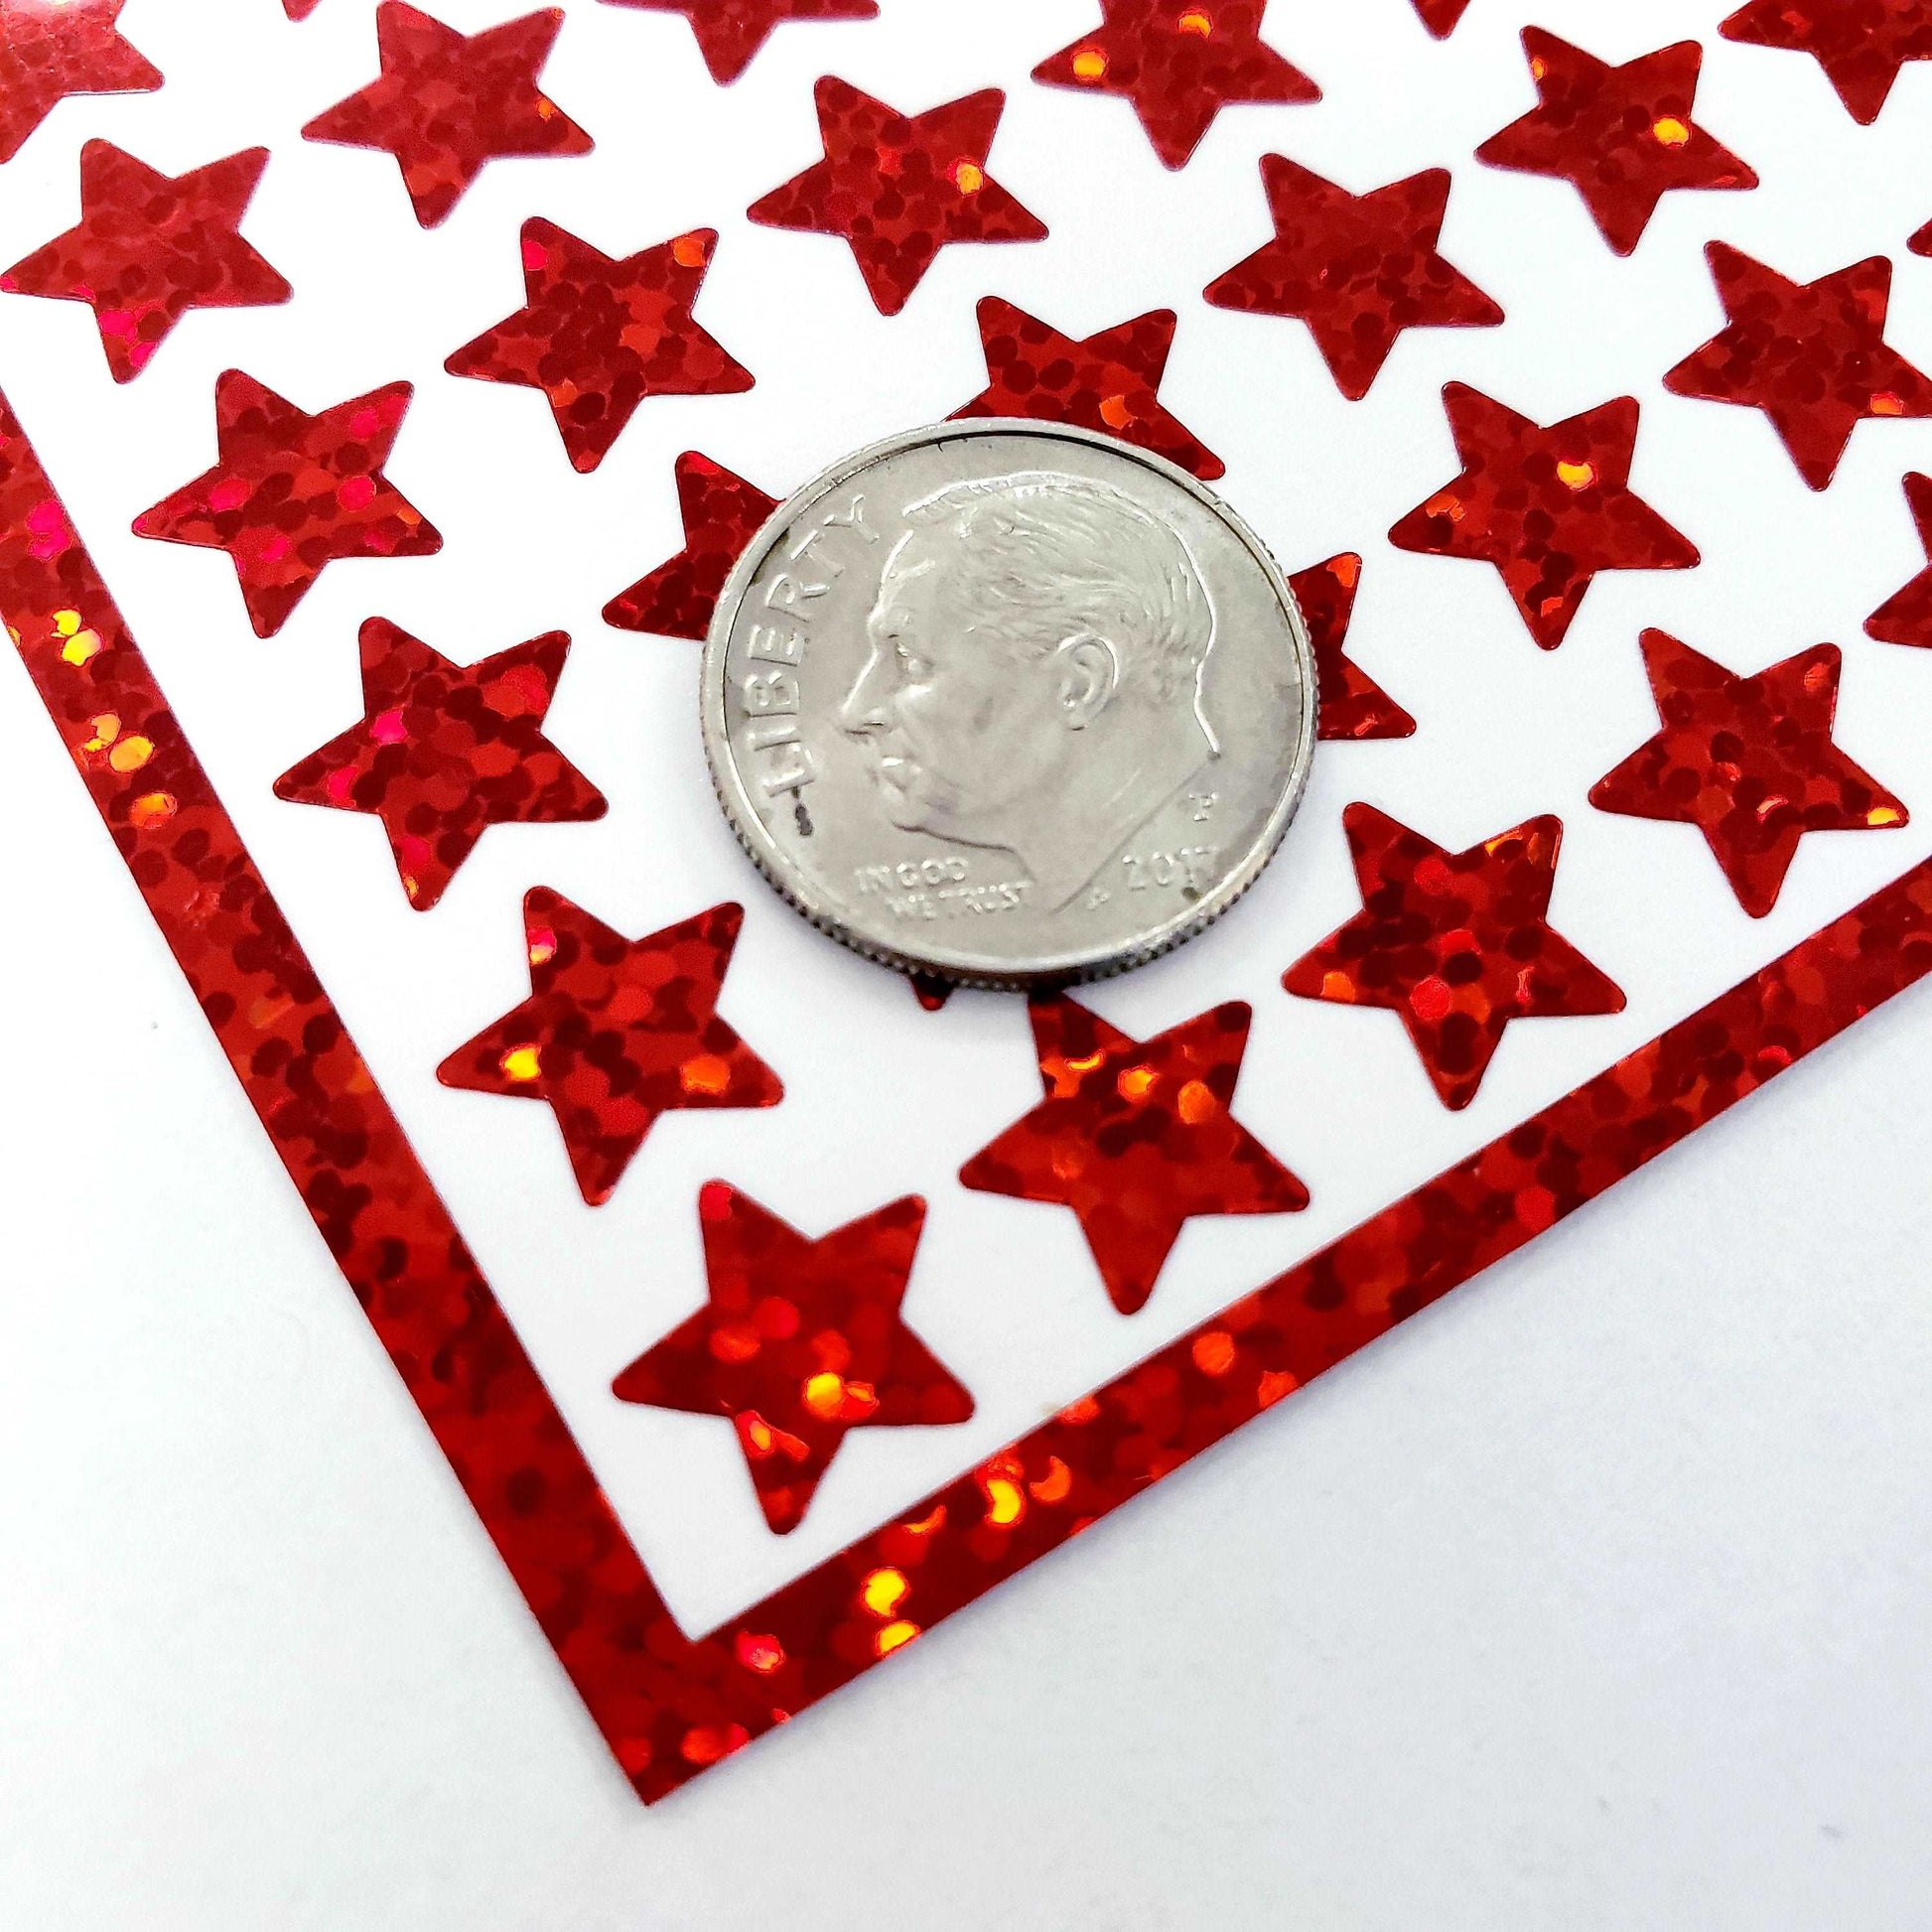 Red Stars Sticker Sheet, set of 192 star vinyl decals, decorative stickers for ornaments, junk journals, scrapbook pages and craft projects.